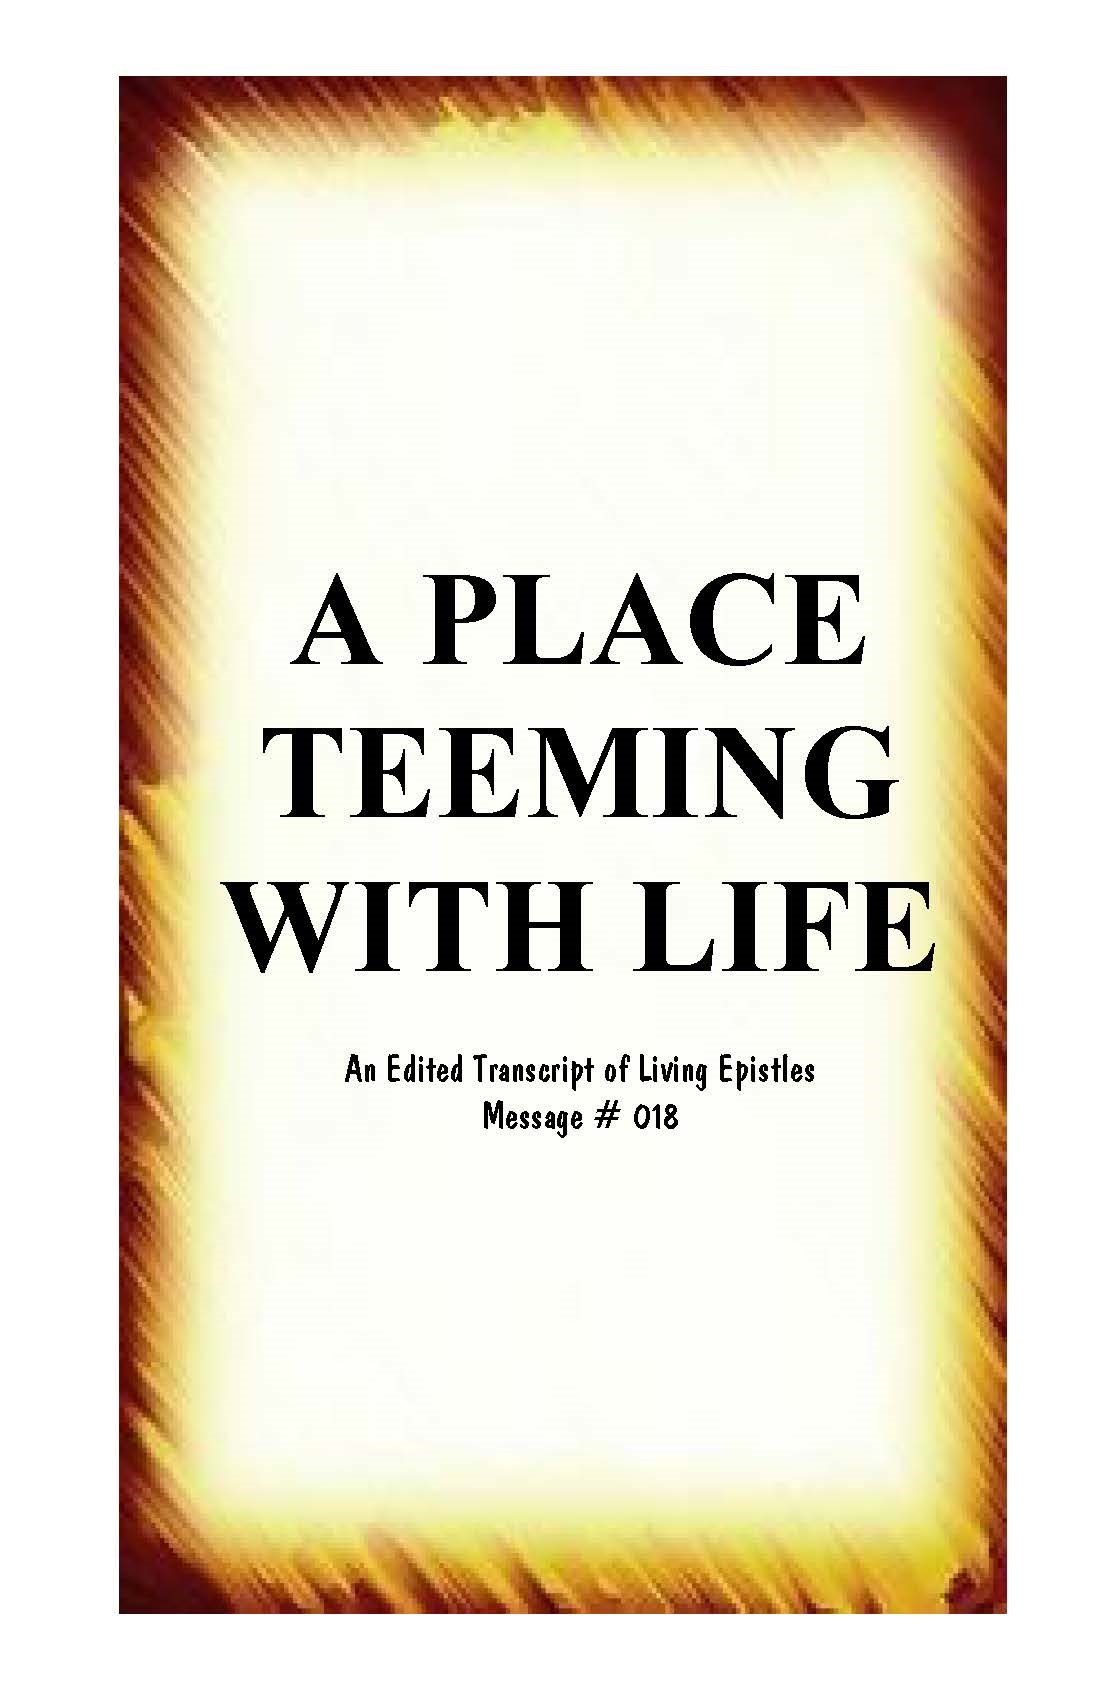 APlaceTeemingWithLife.LEM.018.7.Cover.040516.72dpi